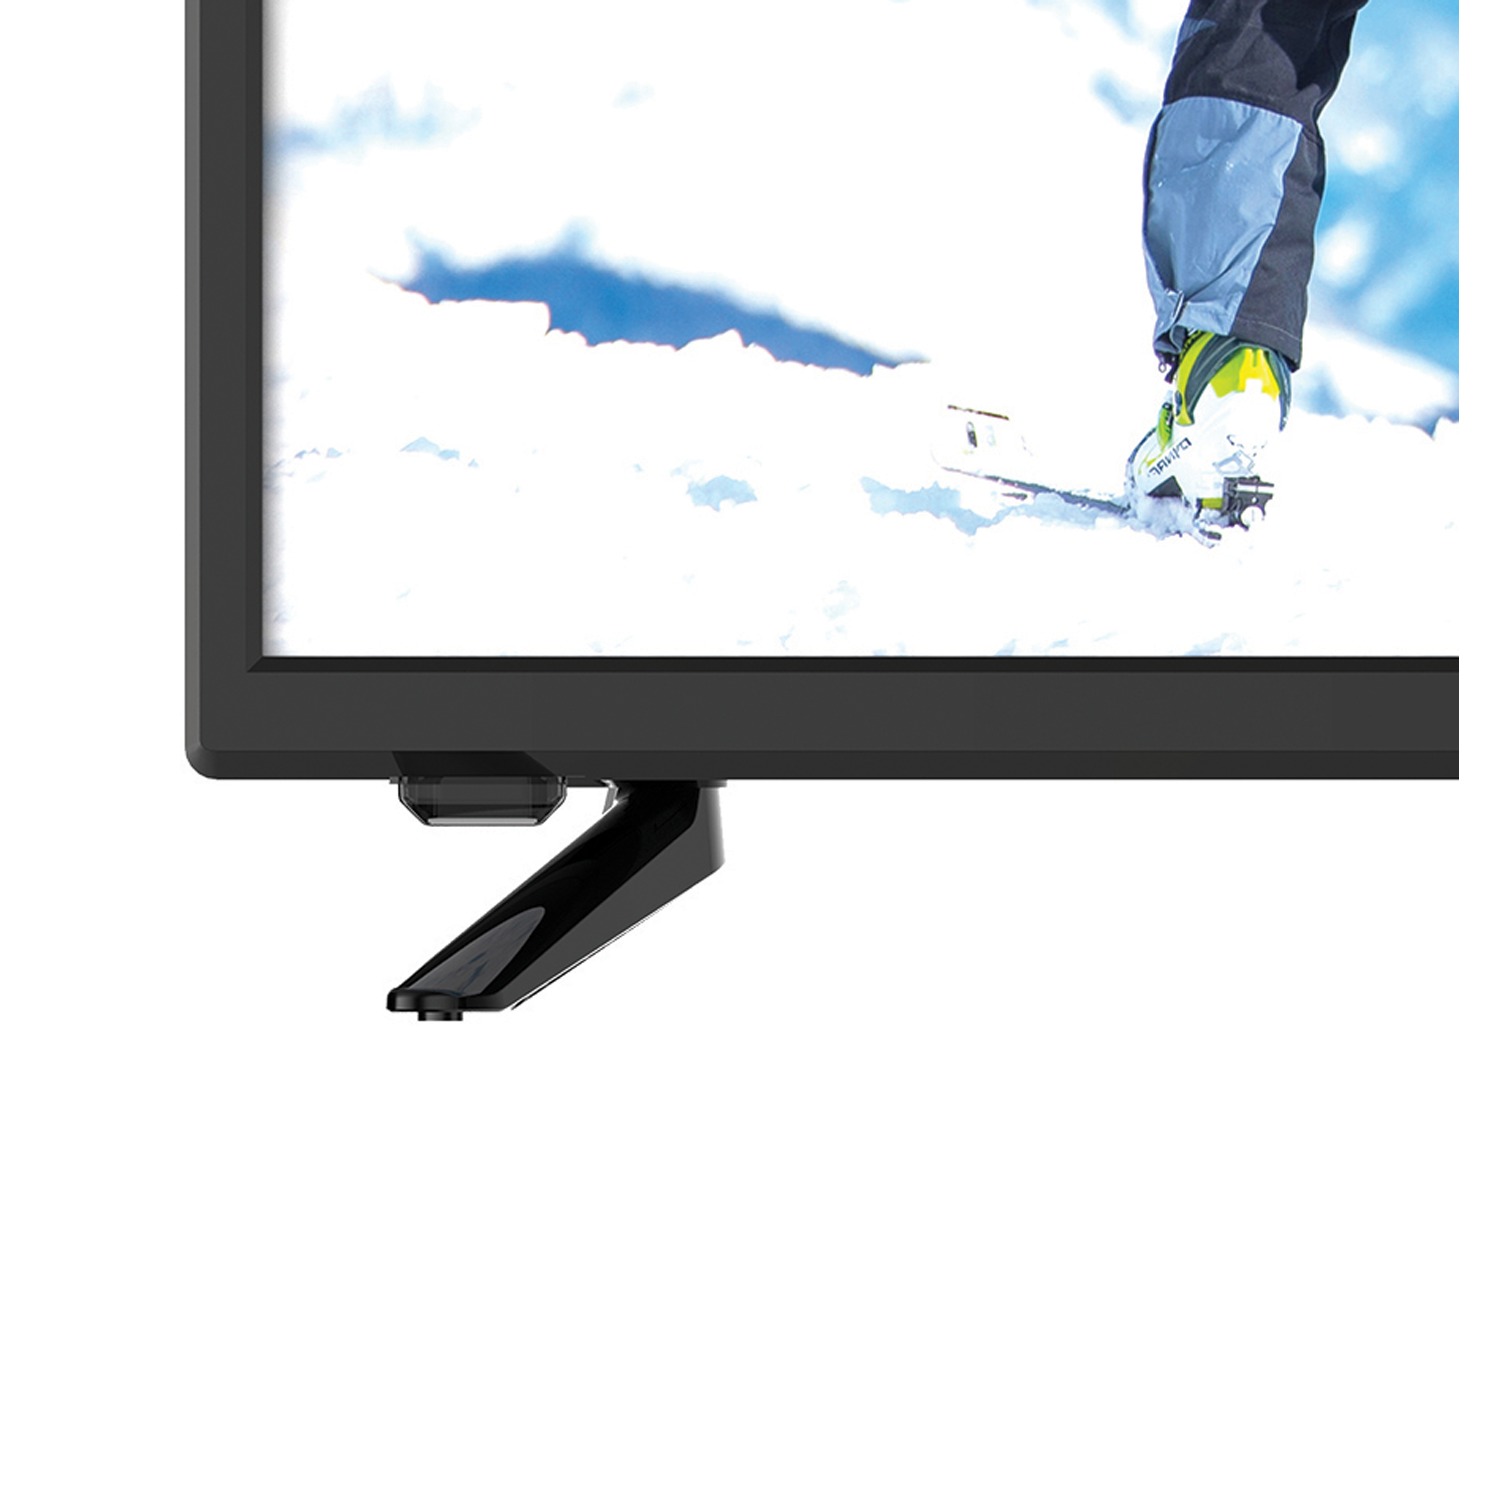 Supersonic 32" Class LED 1366 x 768 Widescreen HDTV - image 3 of 4